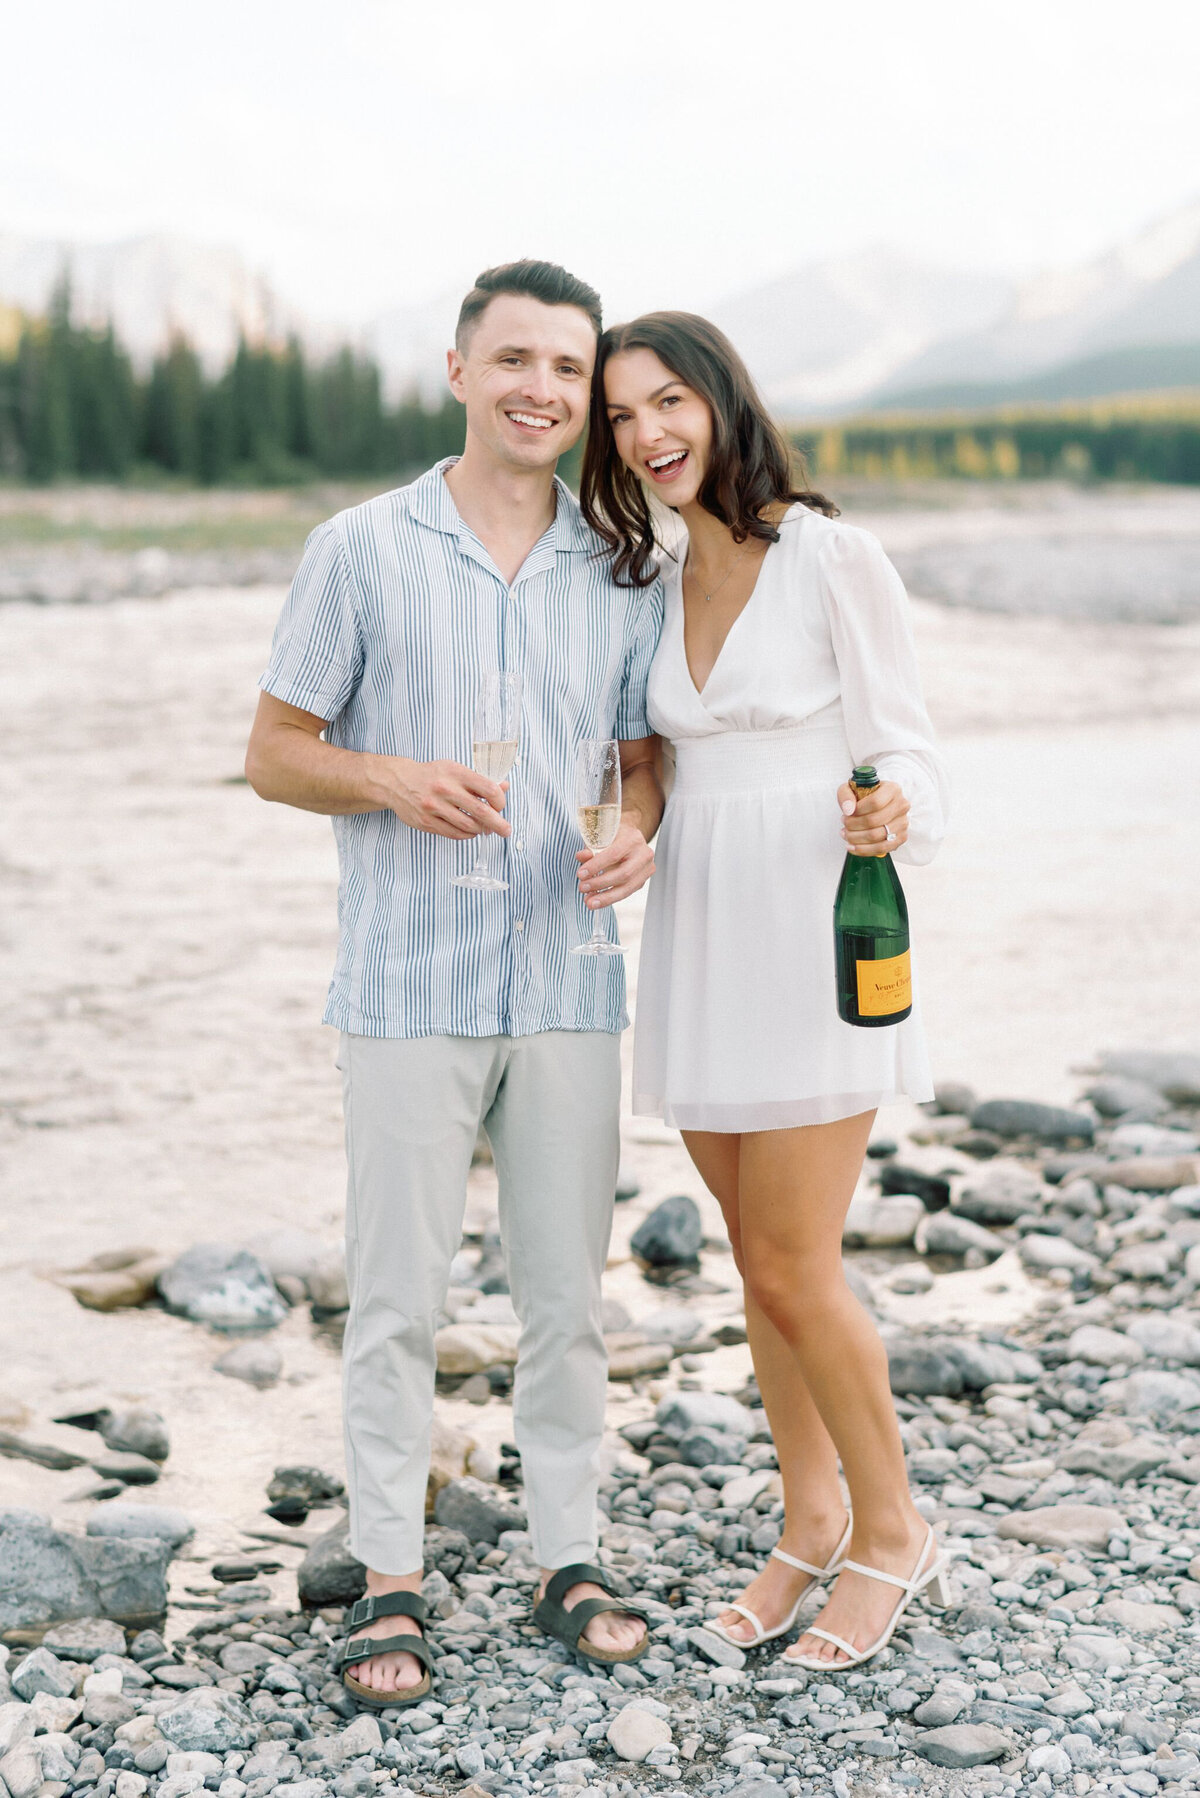 Engaged couple captured by Kaity Body Photography, elegant film inspired wedding photographer in Calgary, Alberta. Featured on the Bronte Bride Vendor Guide.